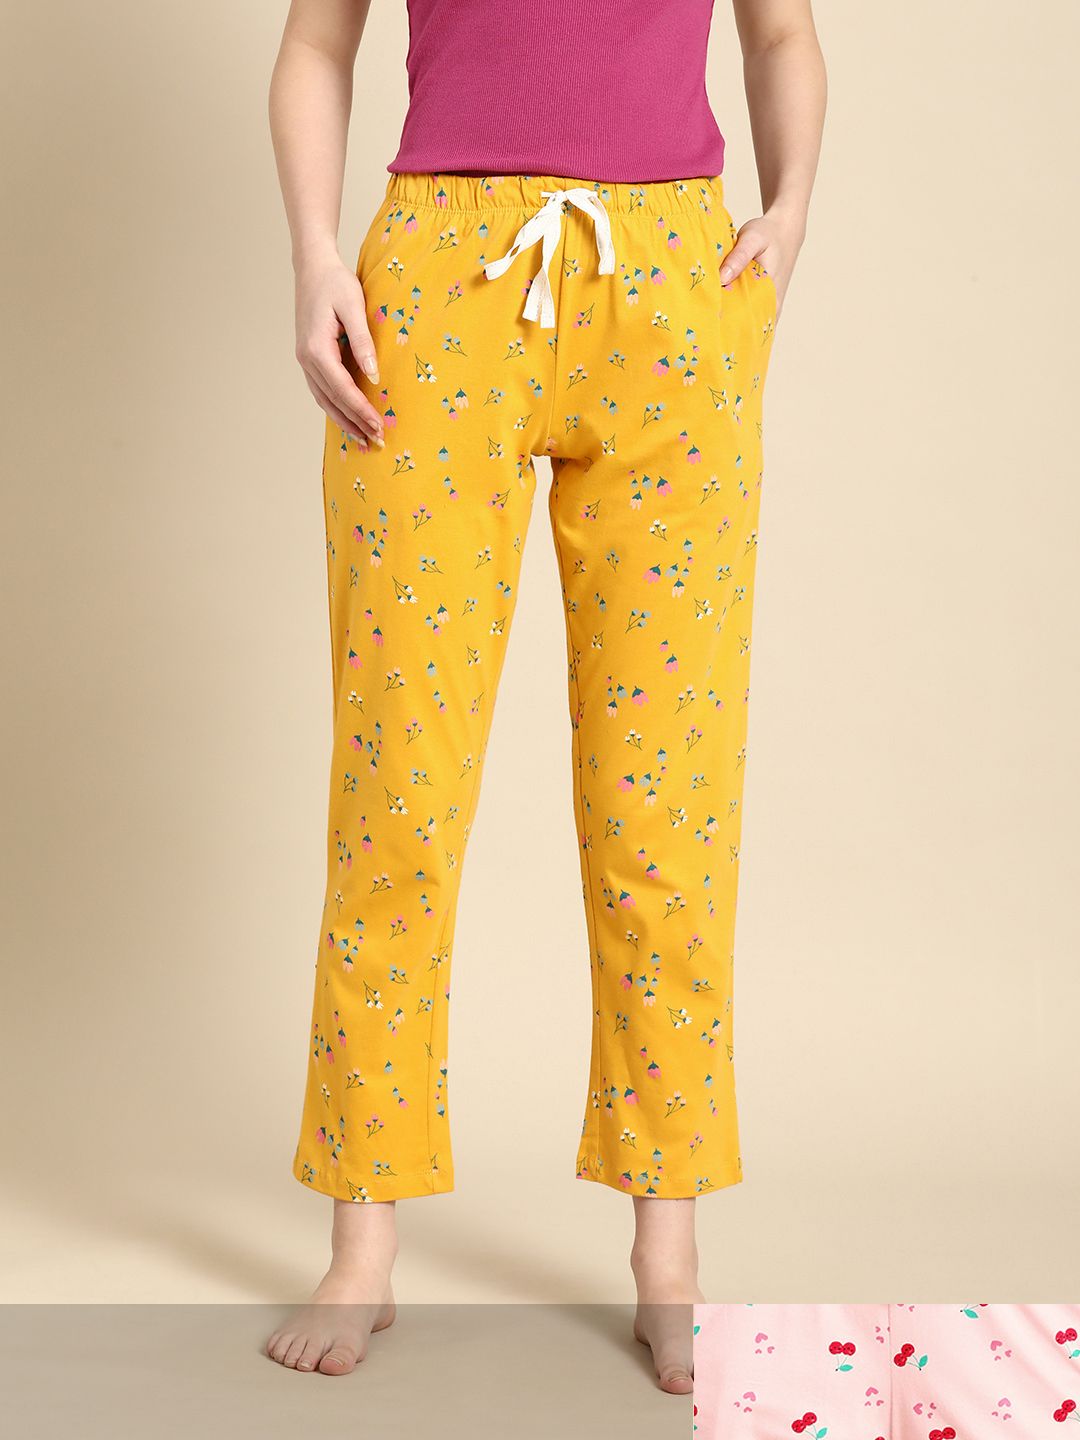 Dreamz by Pantaloons Women Pack of 2 Printed Pure Cotton Lounge Pants in Yellow & Pink Price in India